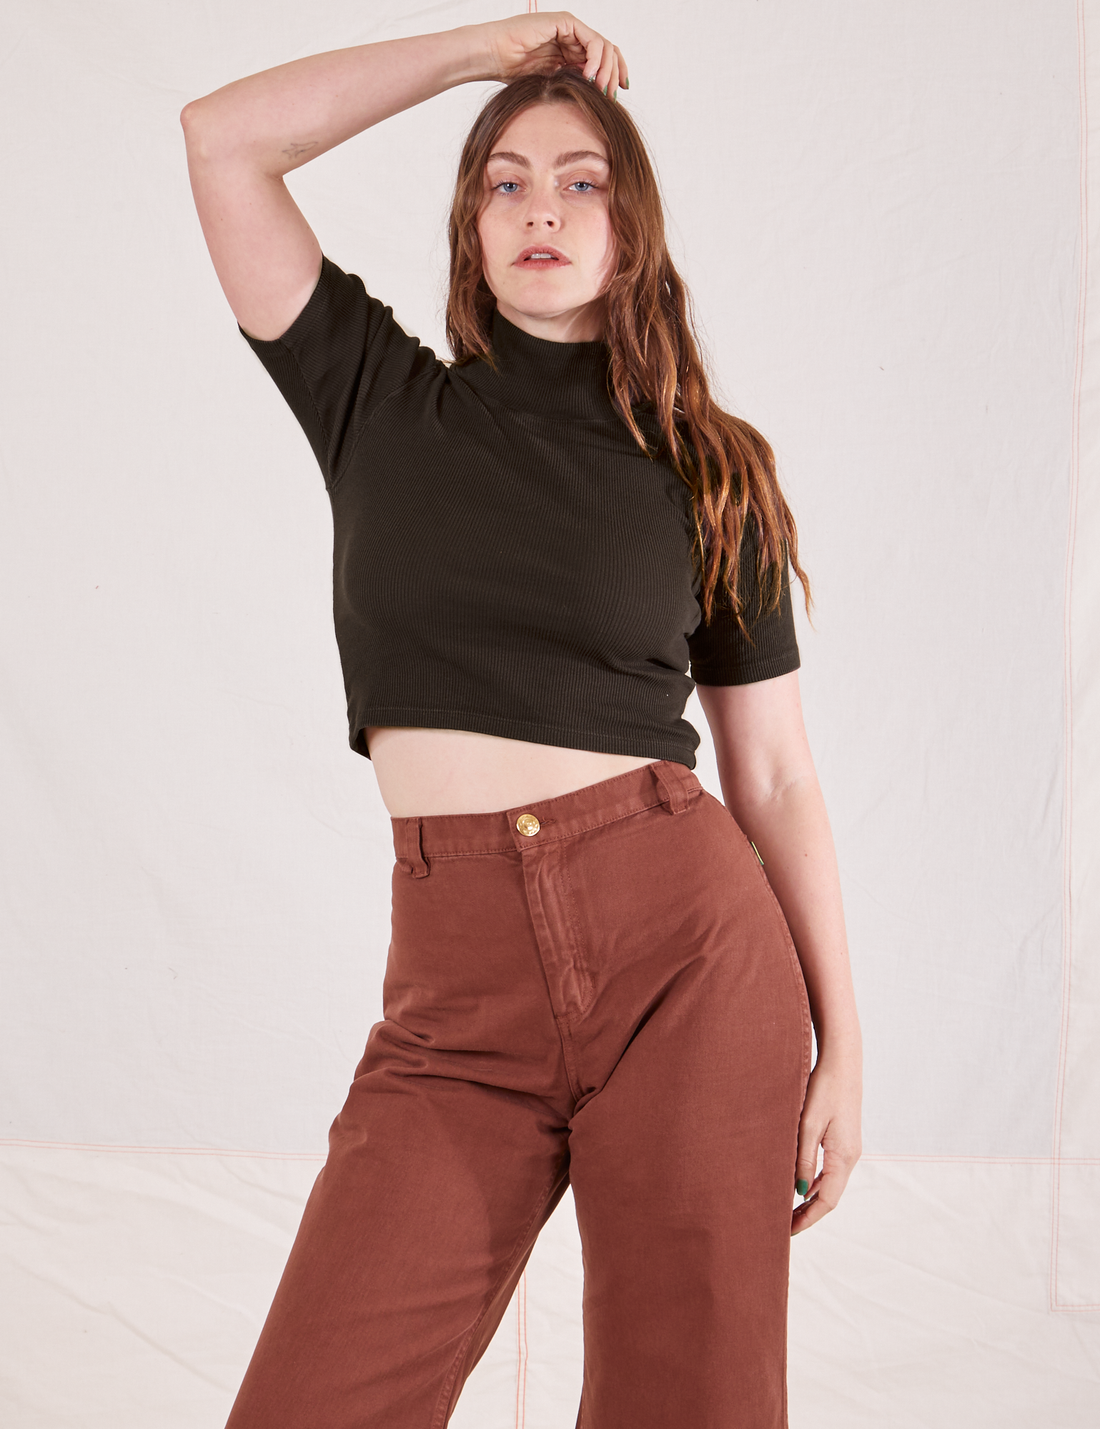 Allison is wearing 1/2 Sleeve Essential Turtleneck in Espresso Brown and fudgesicle brown Bell Bottoms